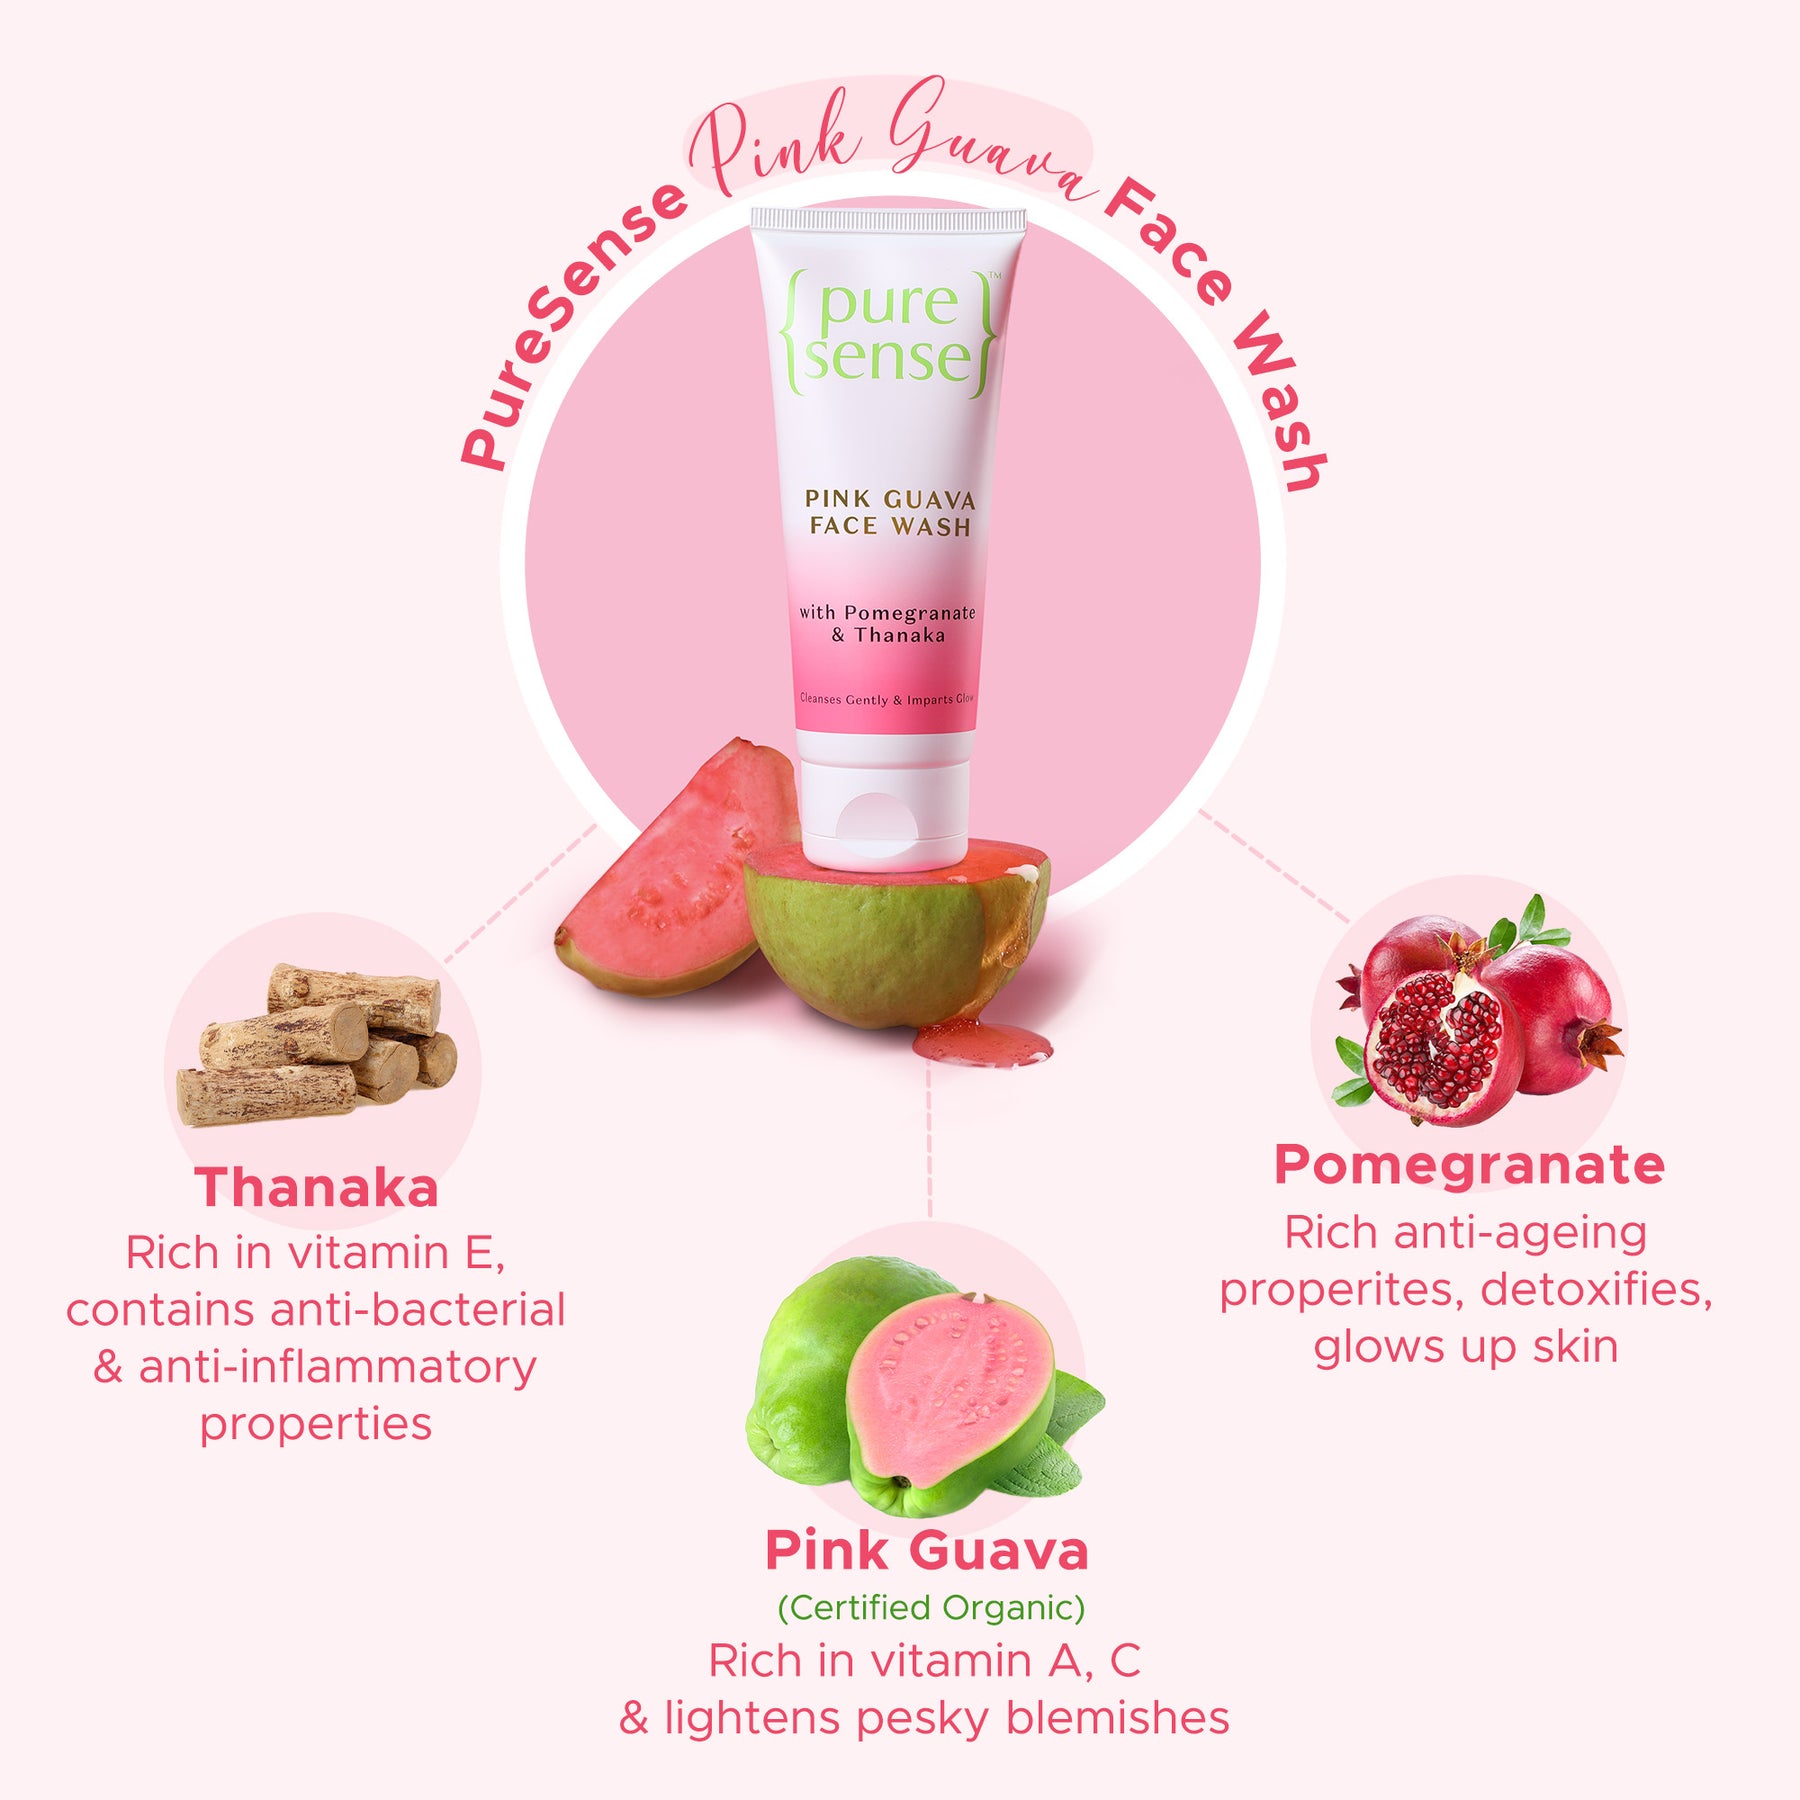 Pink Guava Face Wash | From the makers of Parachute Advansed | 100ml